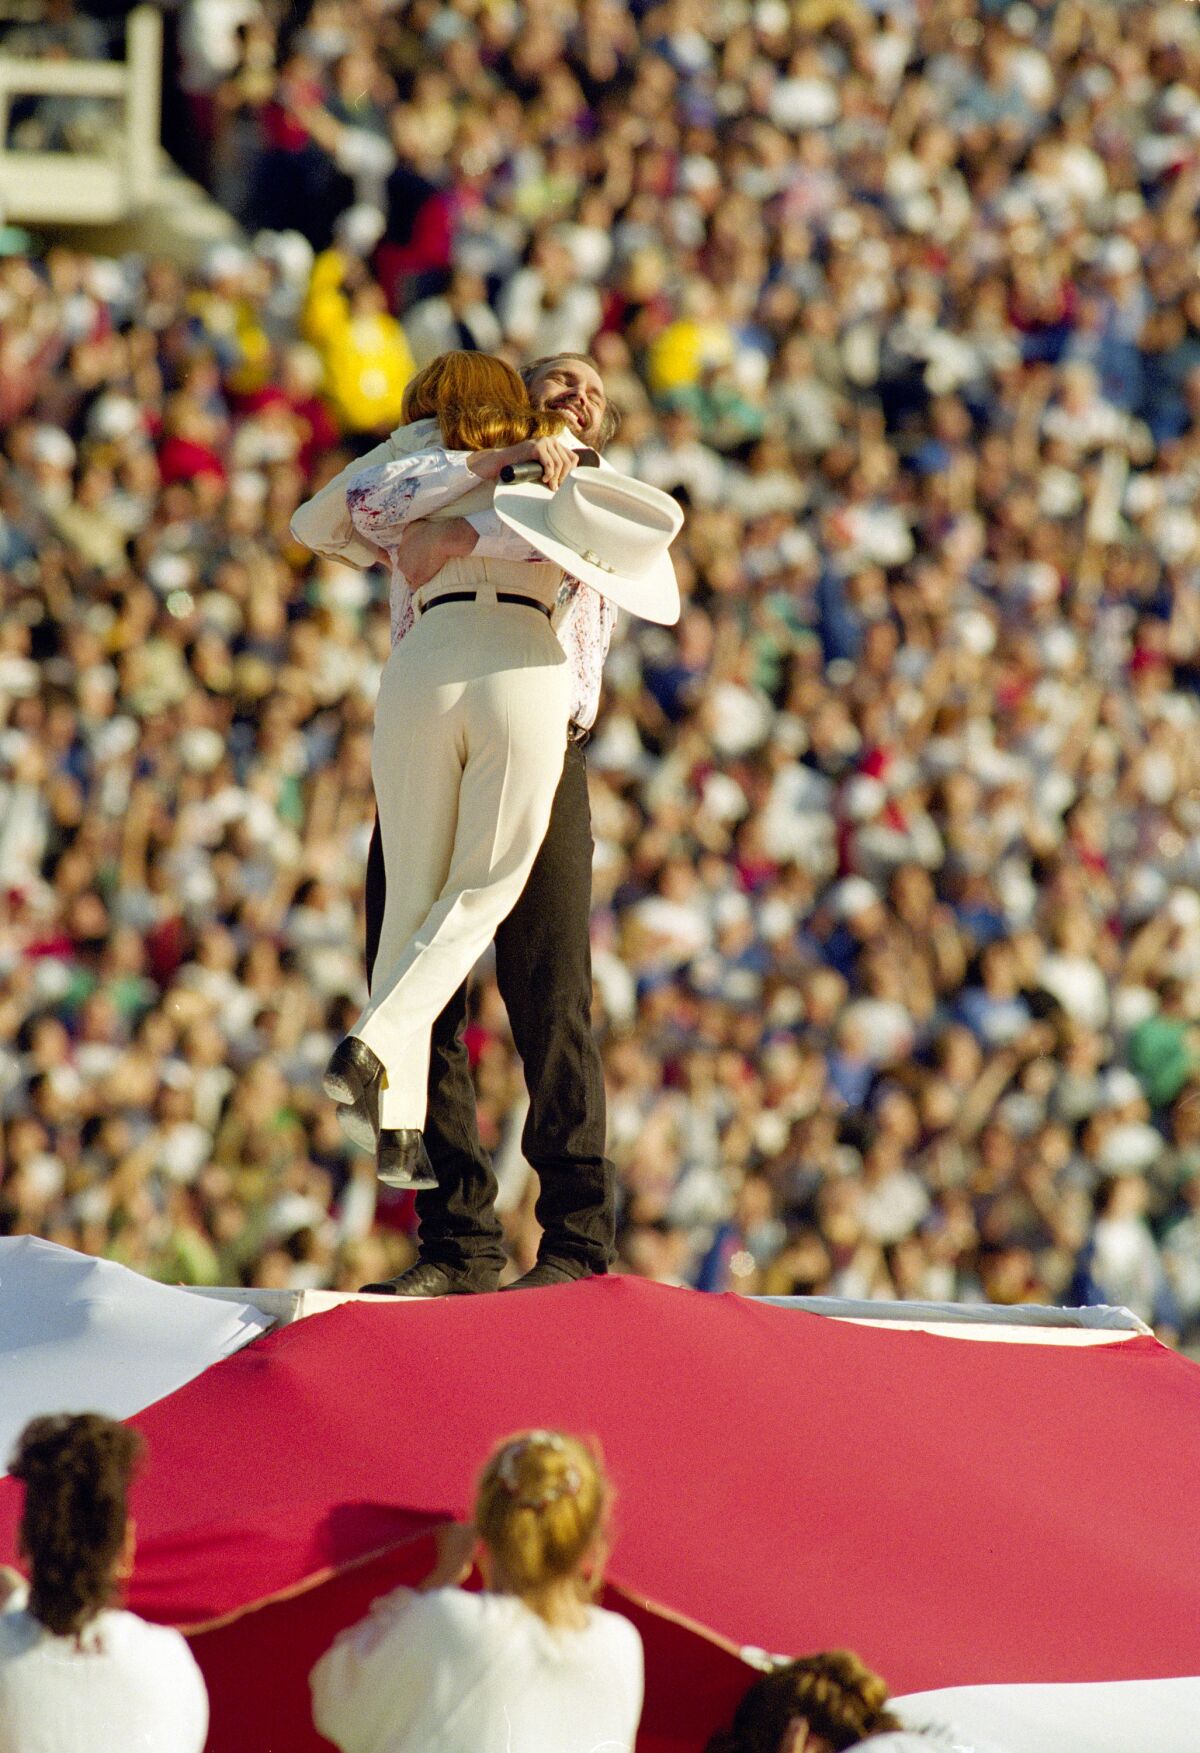 Garth Brooks and Marlee Matlin hug after performing the national anthem at Super Bowl XXVII.